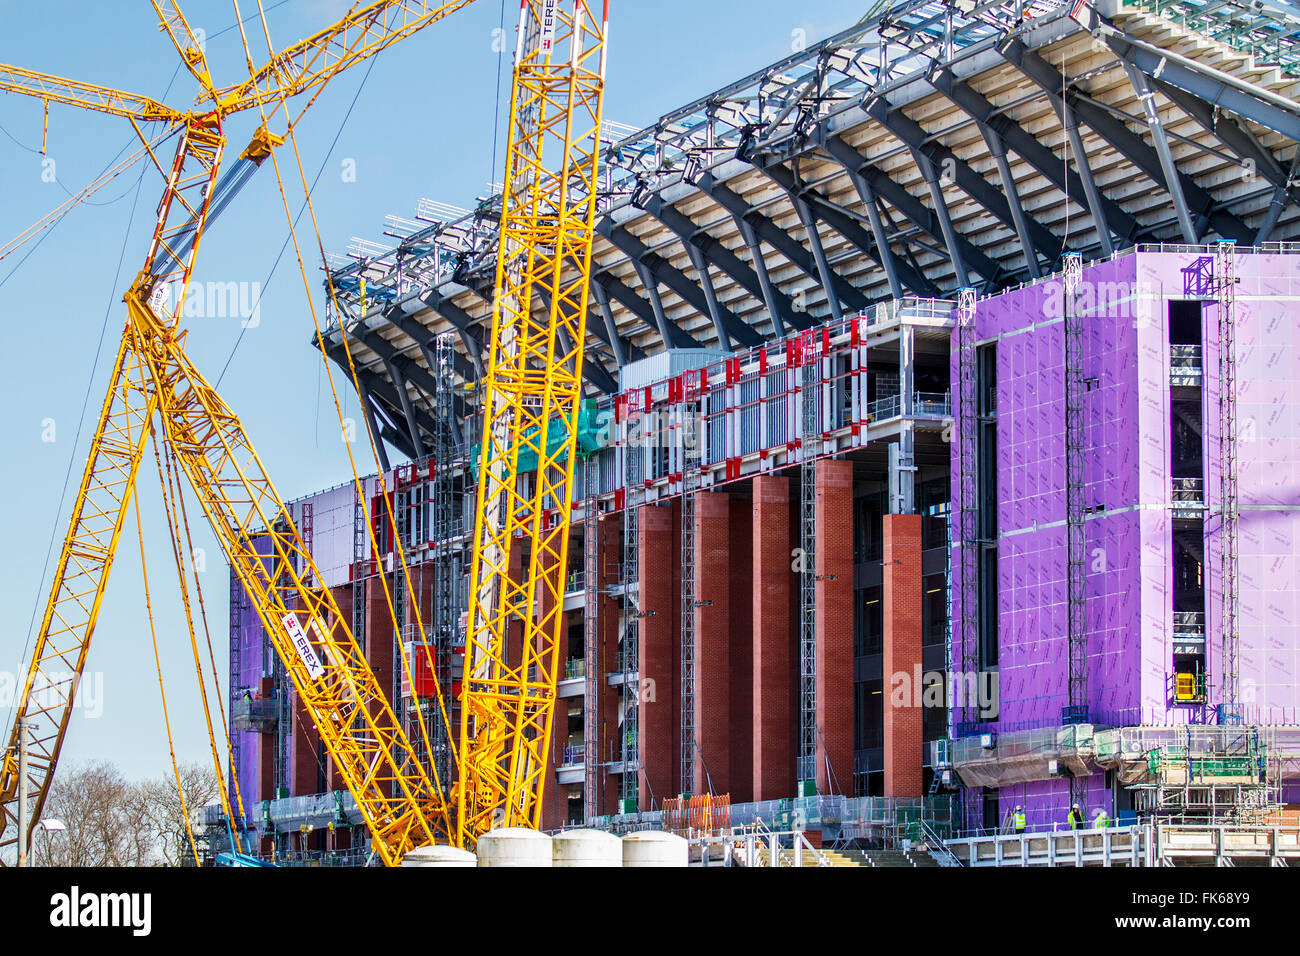 Liverpool FC New Stadium expansion under construction; Football Club Stadia  site improvements underway with up to 2000 building workers jobs available  with the new Anfield Development of their iconic sports stadium, part